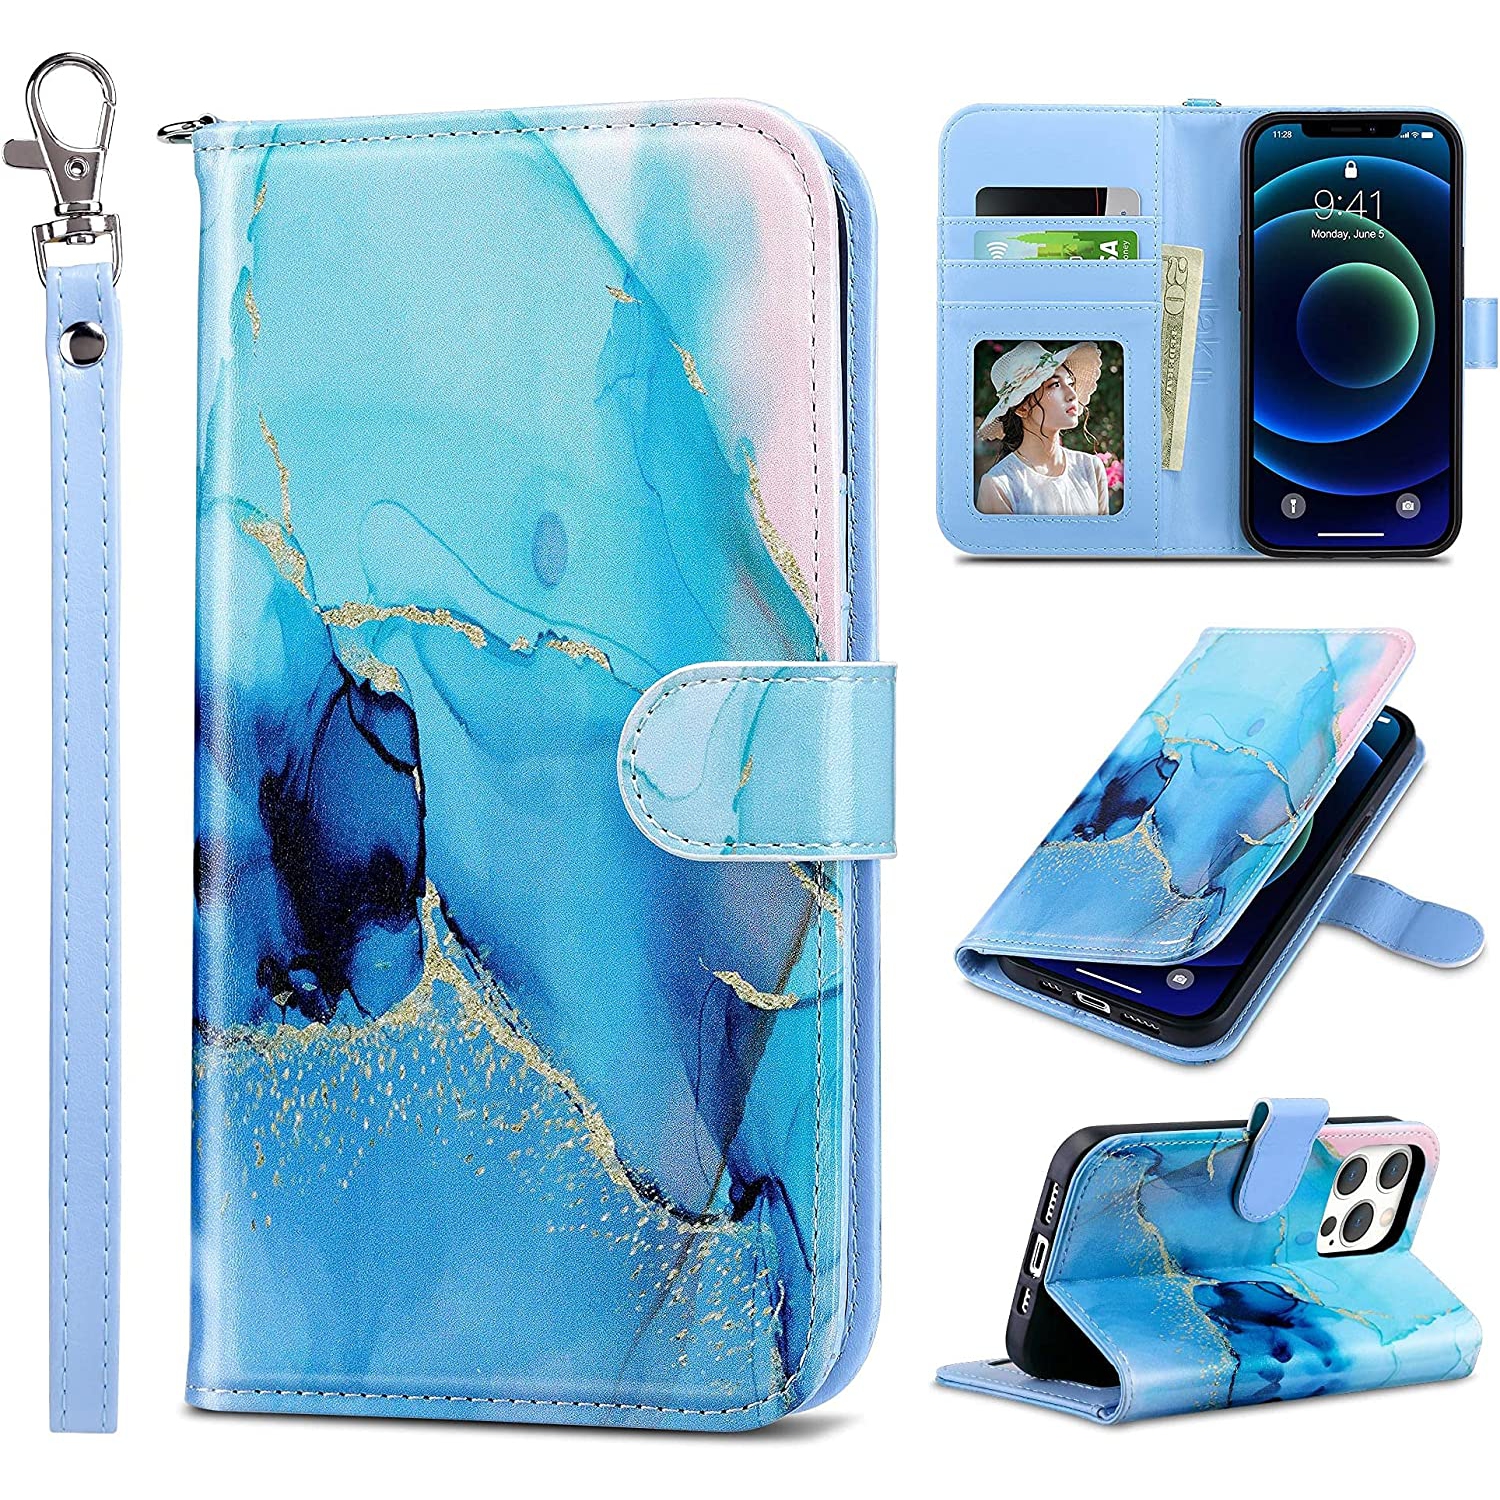 Compatible with iPhone 13 Pro Wallet Case, PU Leather Flip Case with Card Holders Kickstand Wrist Strap,